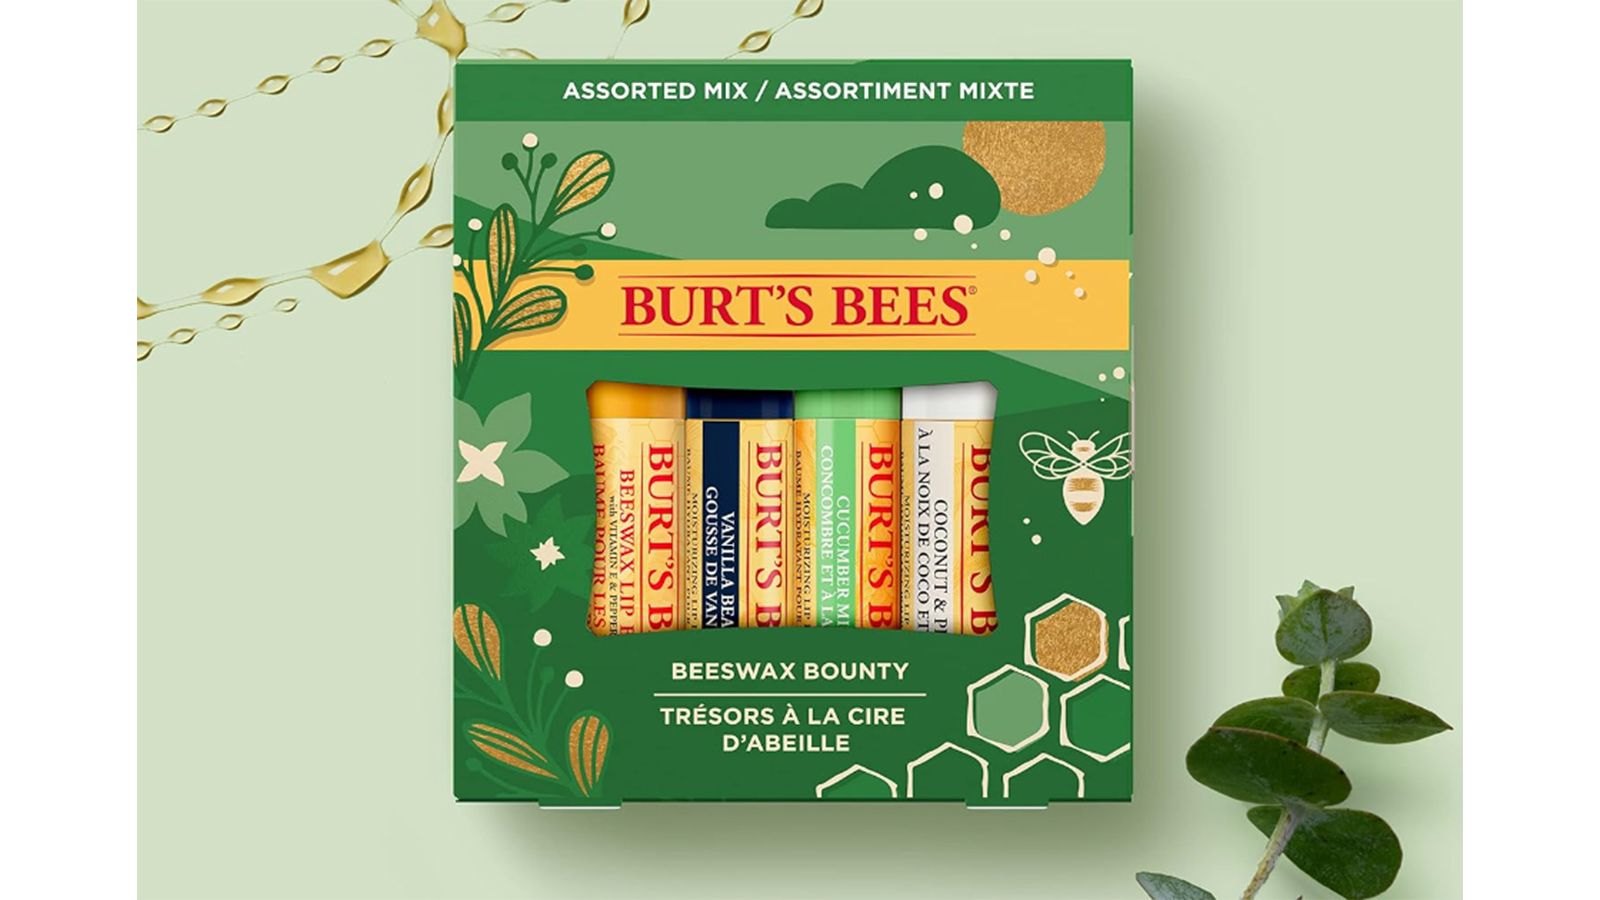 Burt's Bees Lip Balm Stocking Stuffers, Moisturizing Lip Care Holiday Gift,  100% Natural, Original Beeswax with Vitamin E & Peppermint Oil (4 Pack)